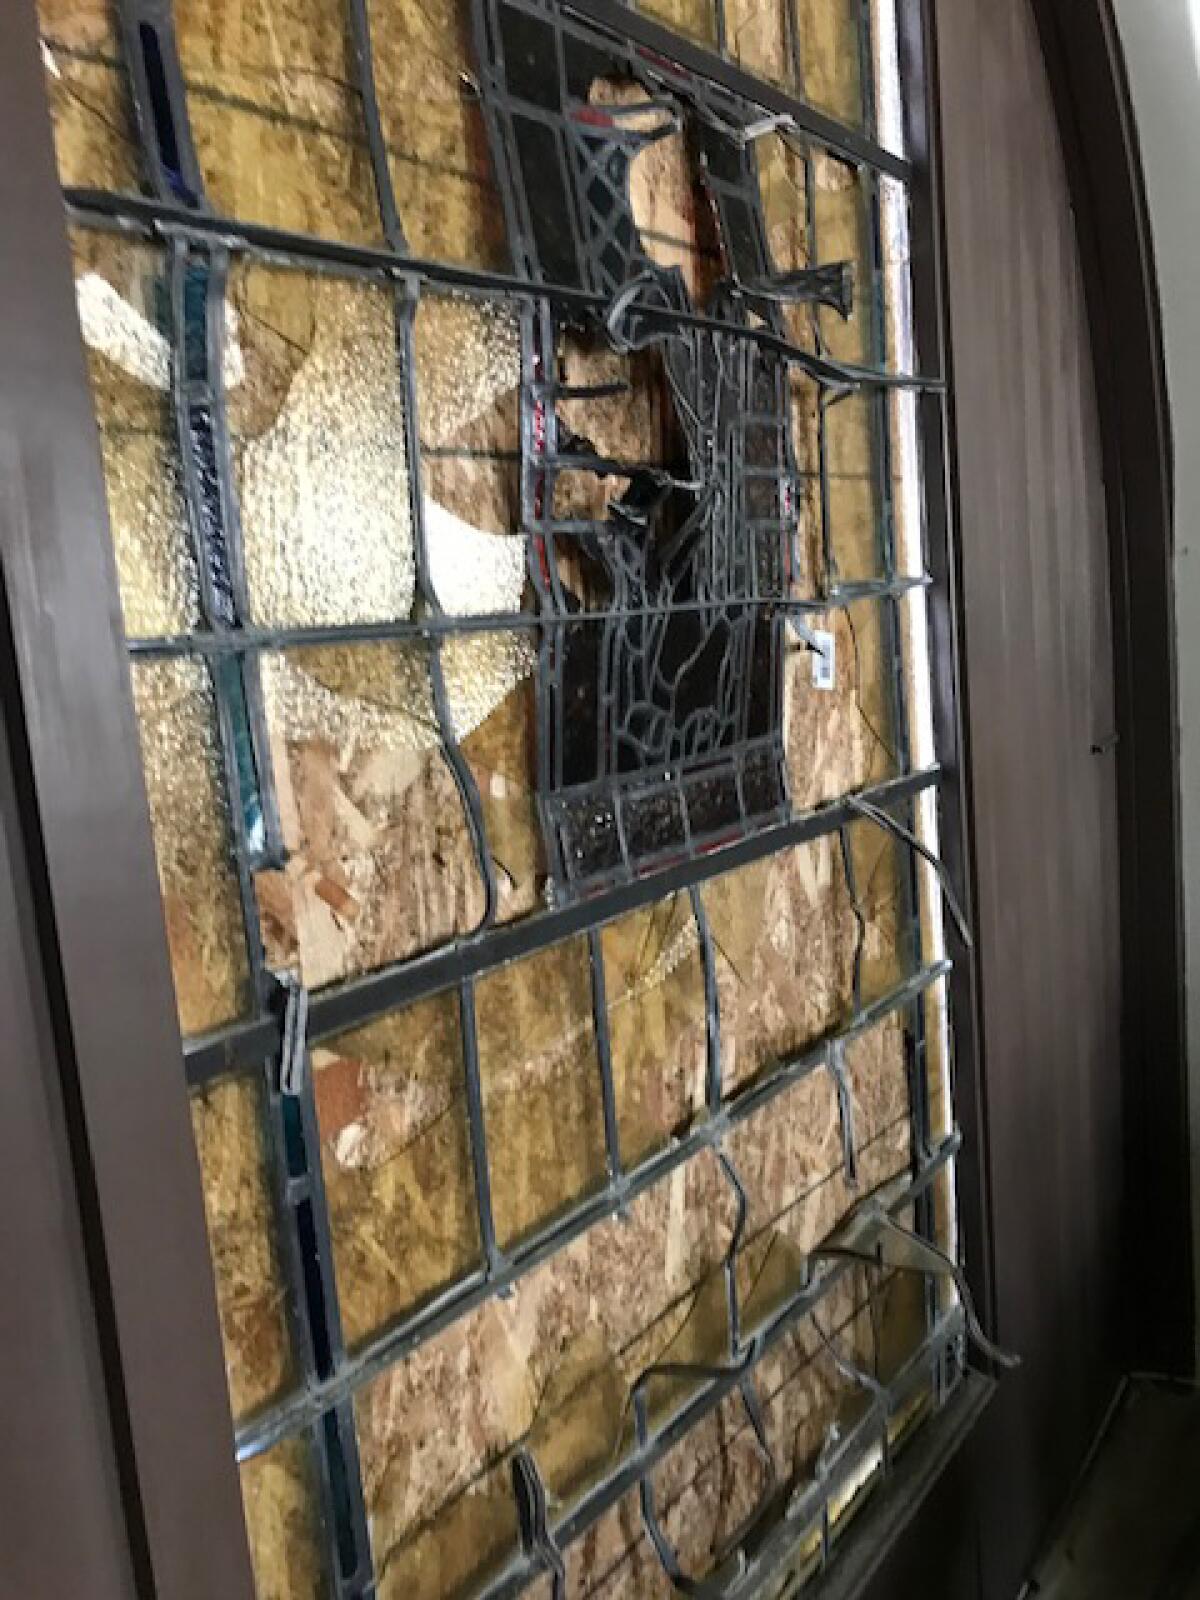 Smashed stained glass window that is boarded up.